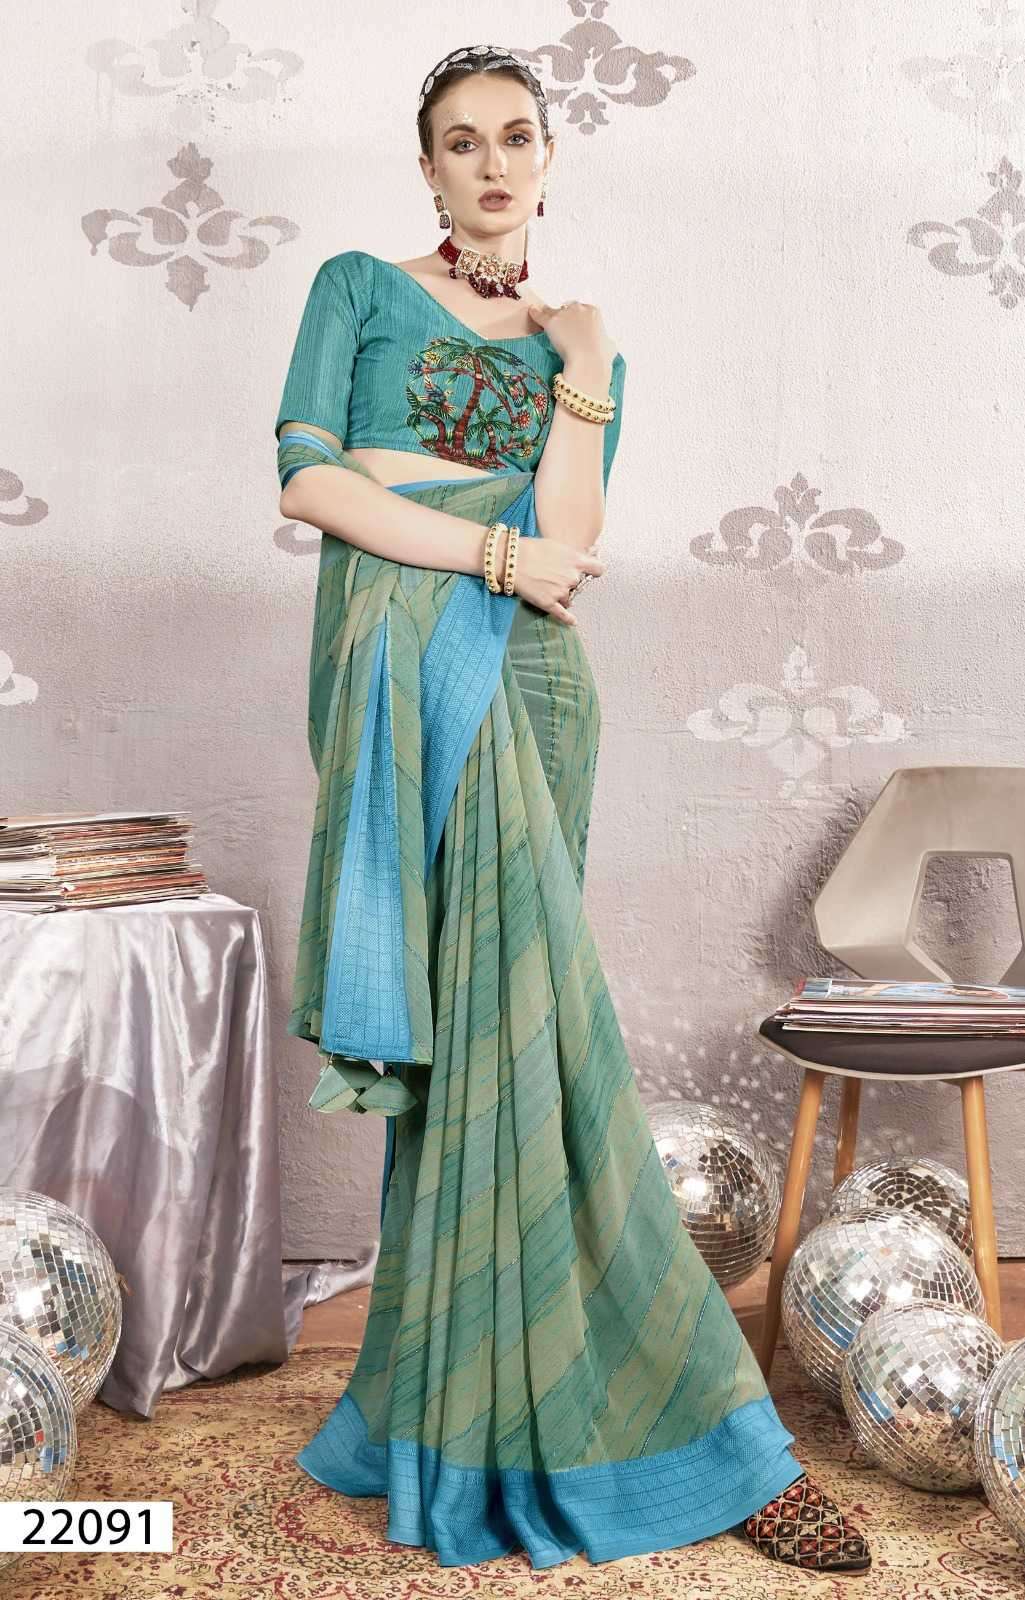 SHUBHLAXMI VOL-6 SERIES 22091 TO 22096 SAREE BY VALLABHI PRINTS DESIGNER PRINTED GEORGETTE SAREES ARE AVAILABLE AT WHOLESALE PRICE